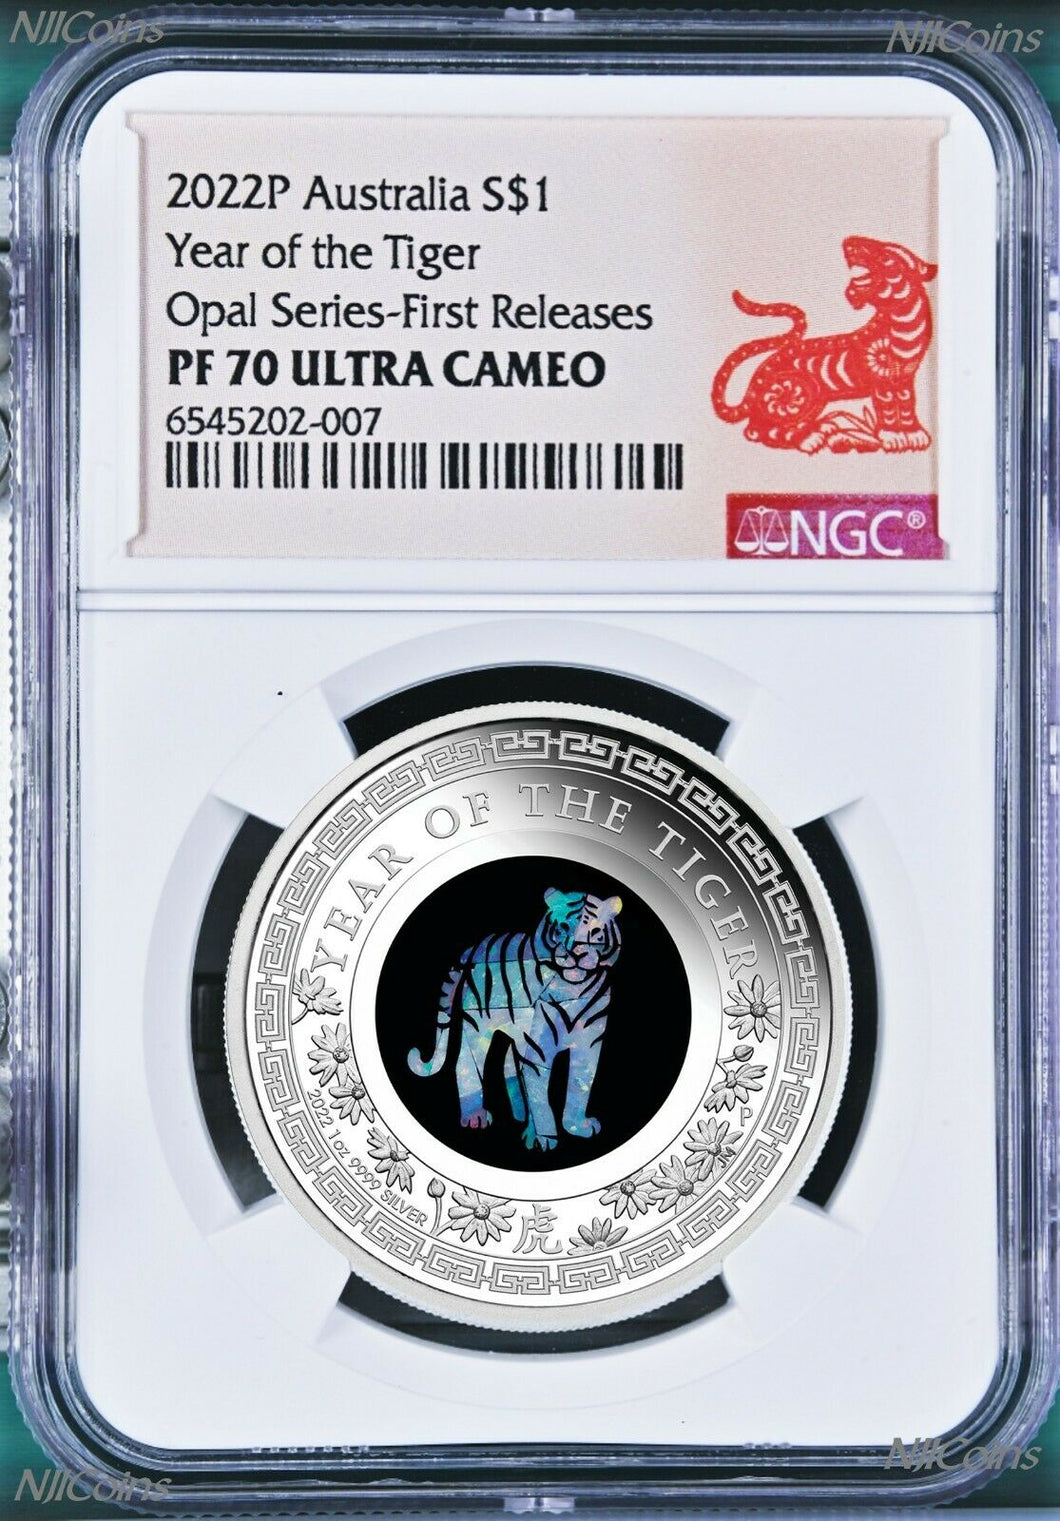 2022 Australia OPAL LUNAR Year of the Tiger 1 oz Silver Proof Coin 